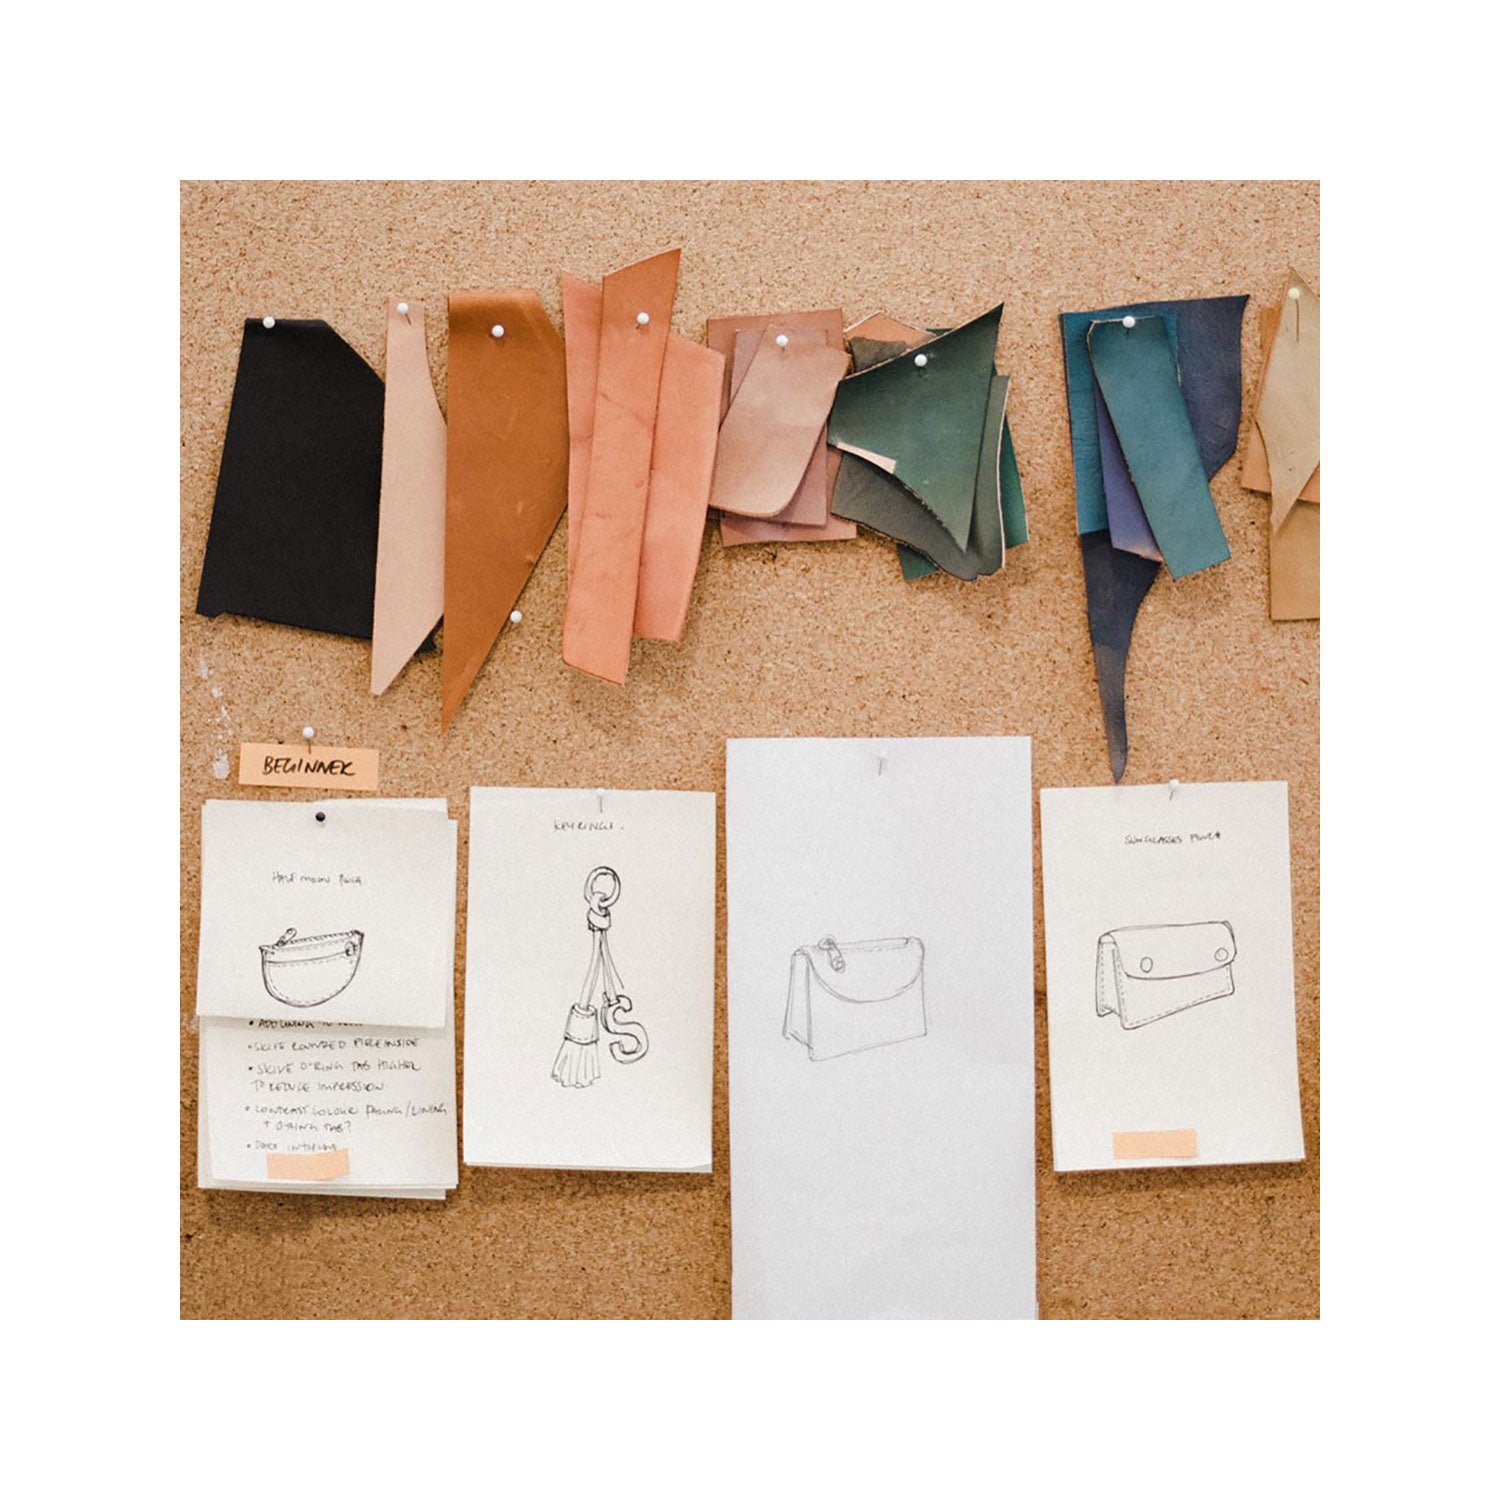 simétrie kangaroo leather swatches and bag sketches